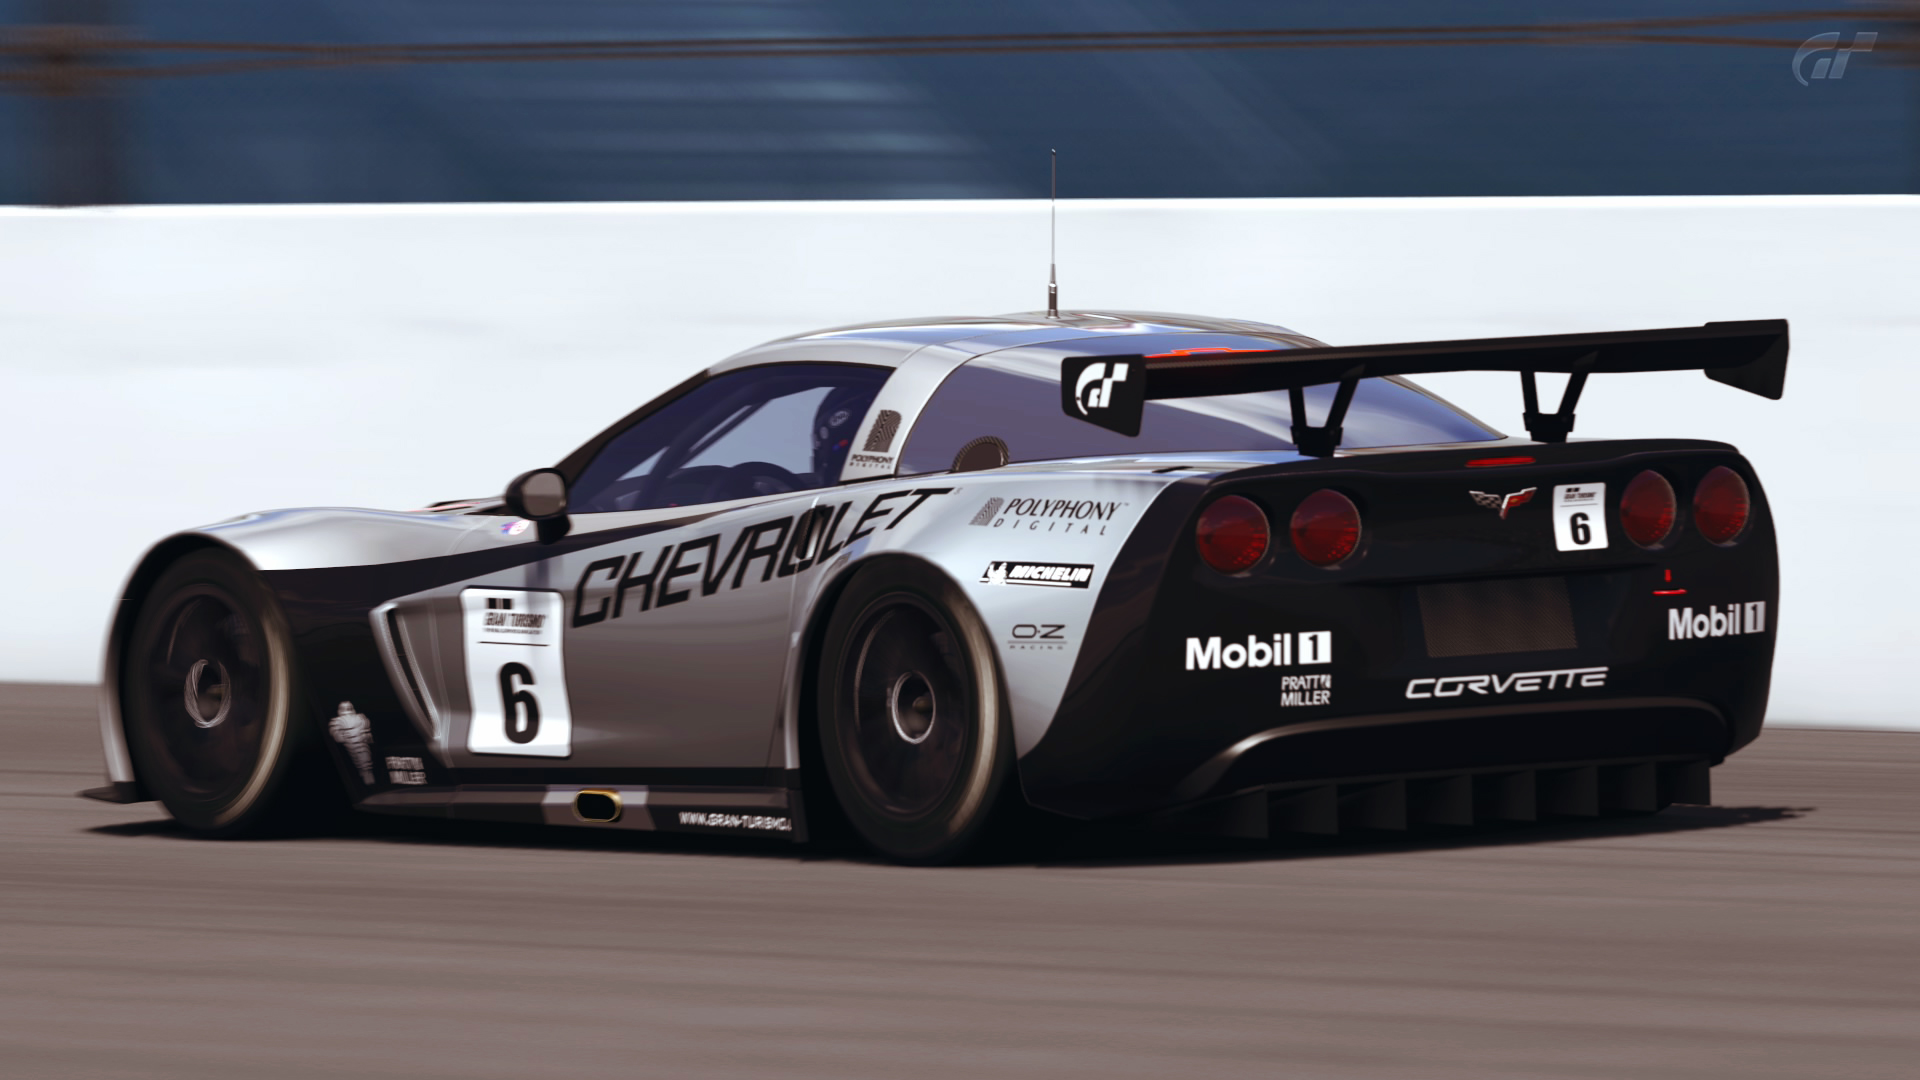 2006 Ford GT (Gran Turismo 5) by Vertualissimo on DeviantArt